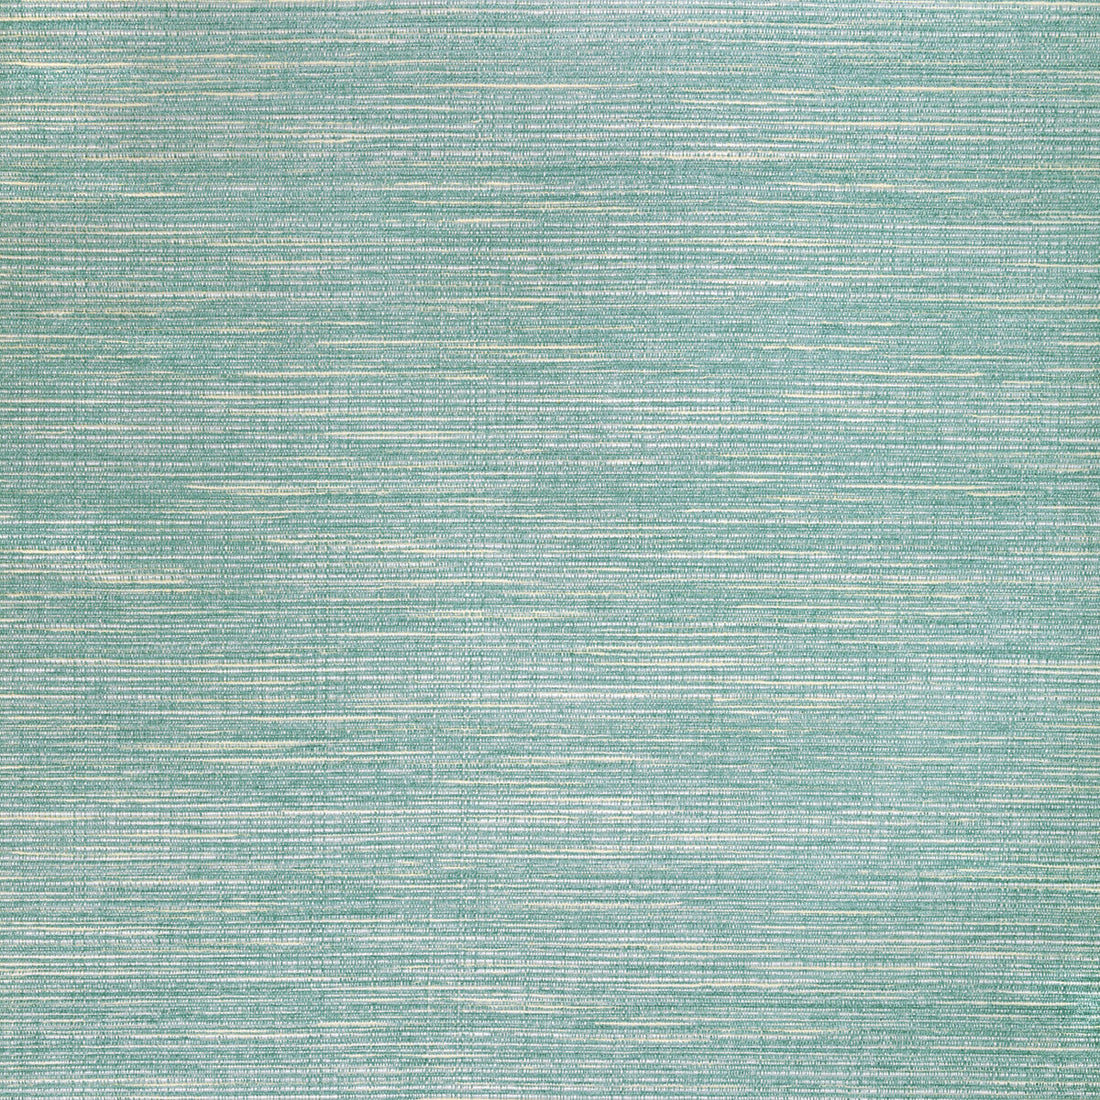 Patrasso fabric in spa color - pattern 36374.13.0 - by Kravet Basics